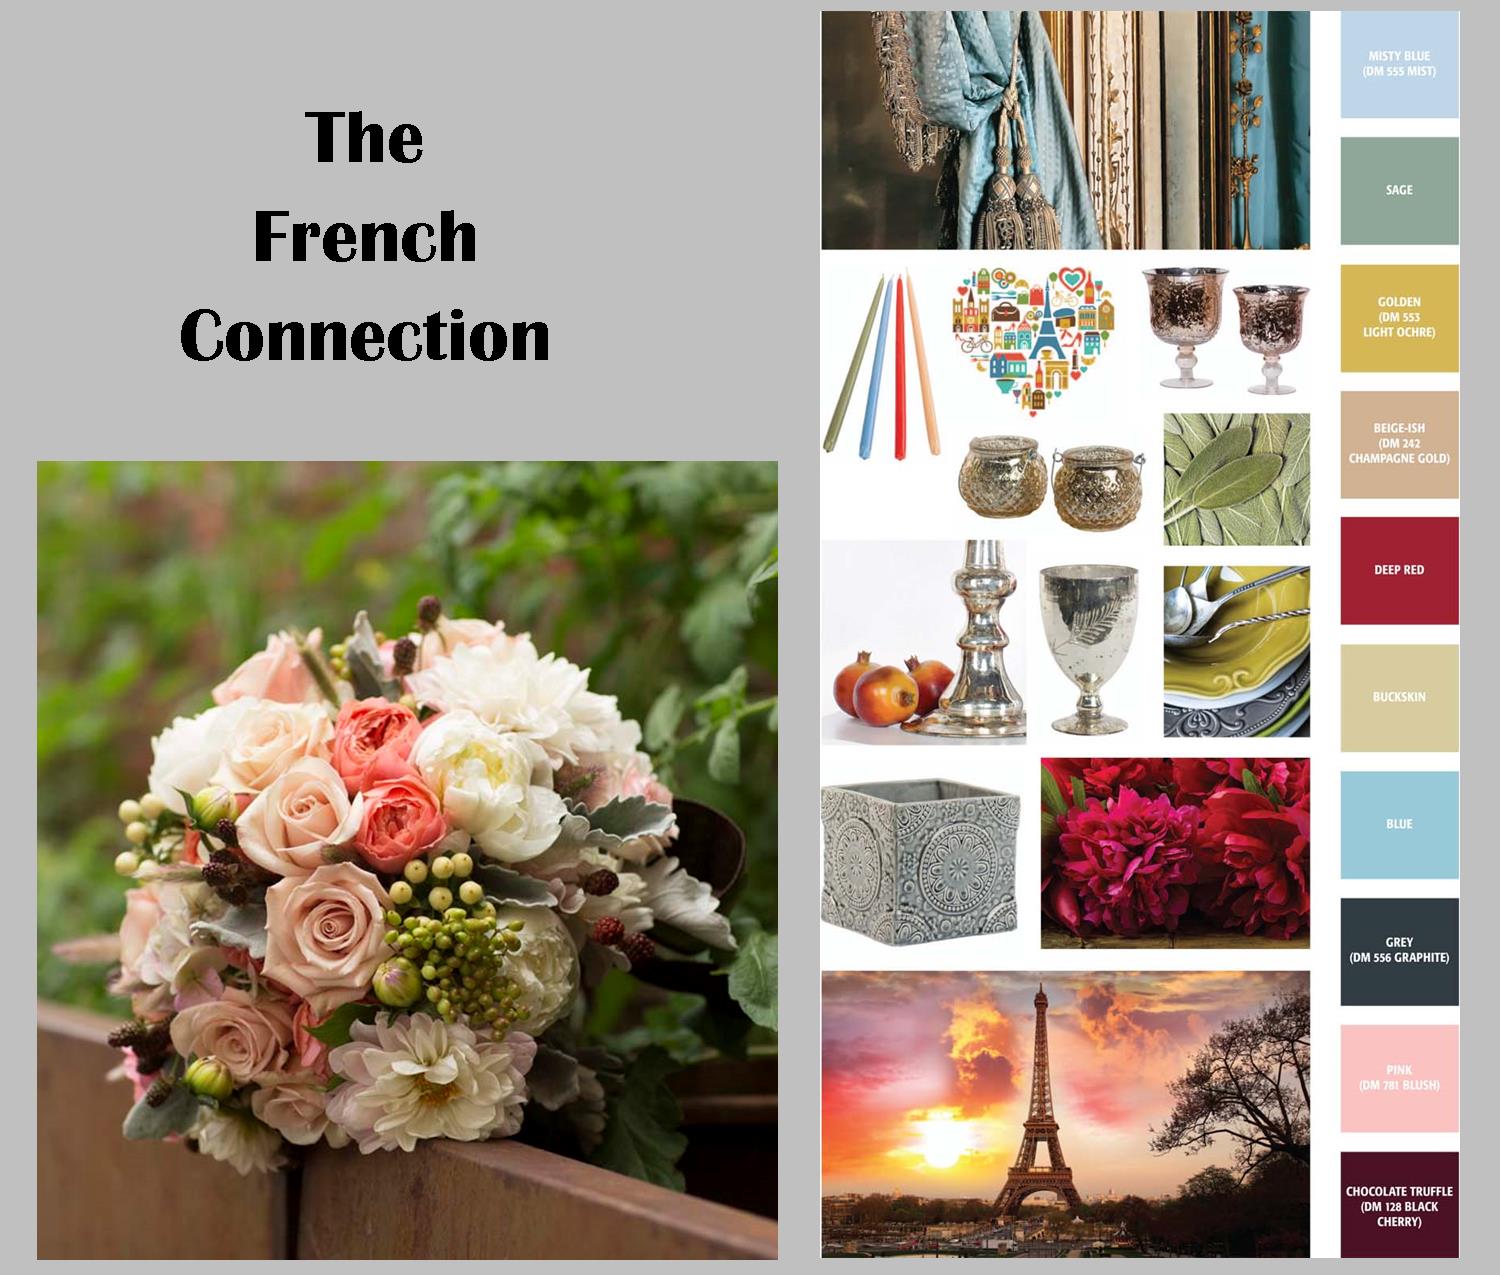 'Falling in love with France again' summarizes emerging French Connection flower trend.